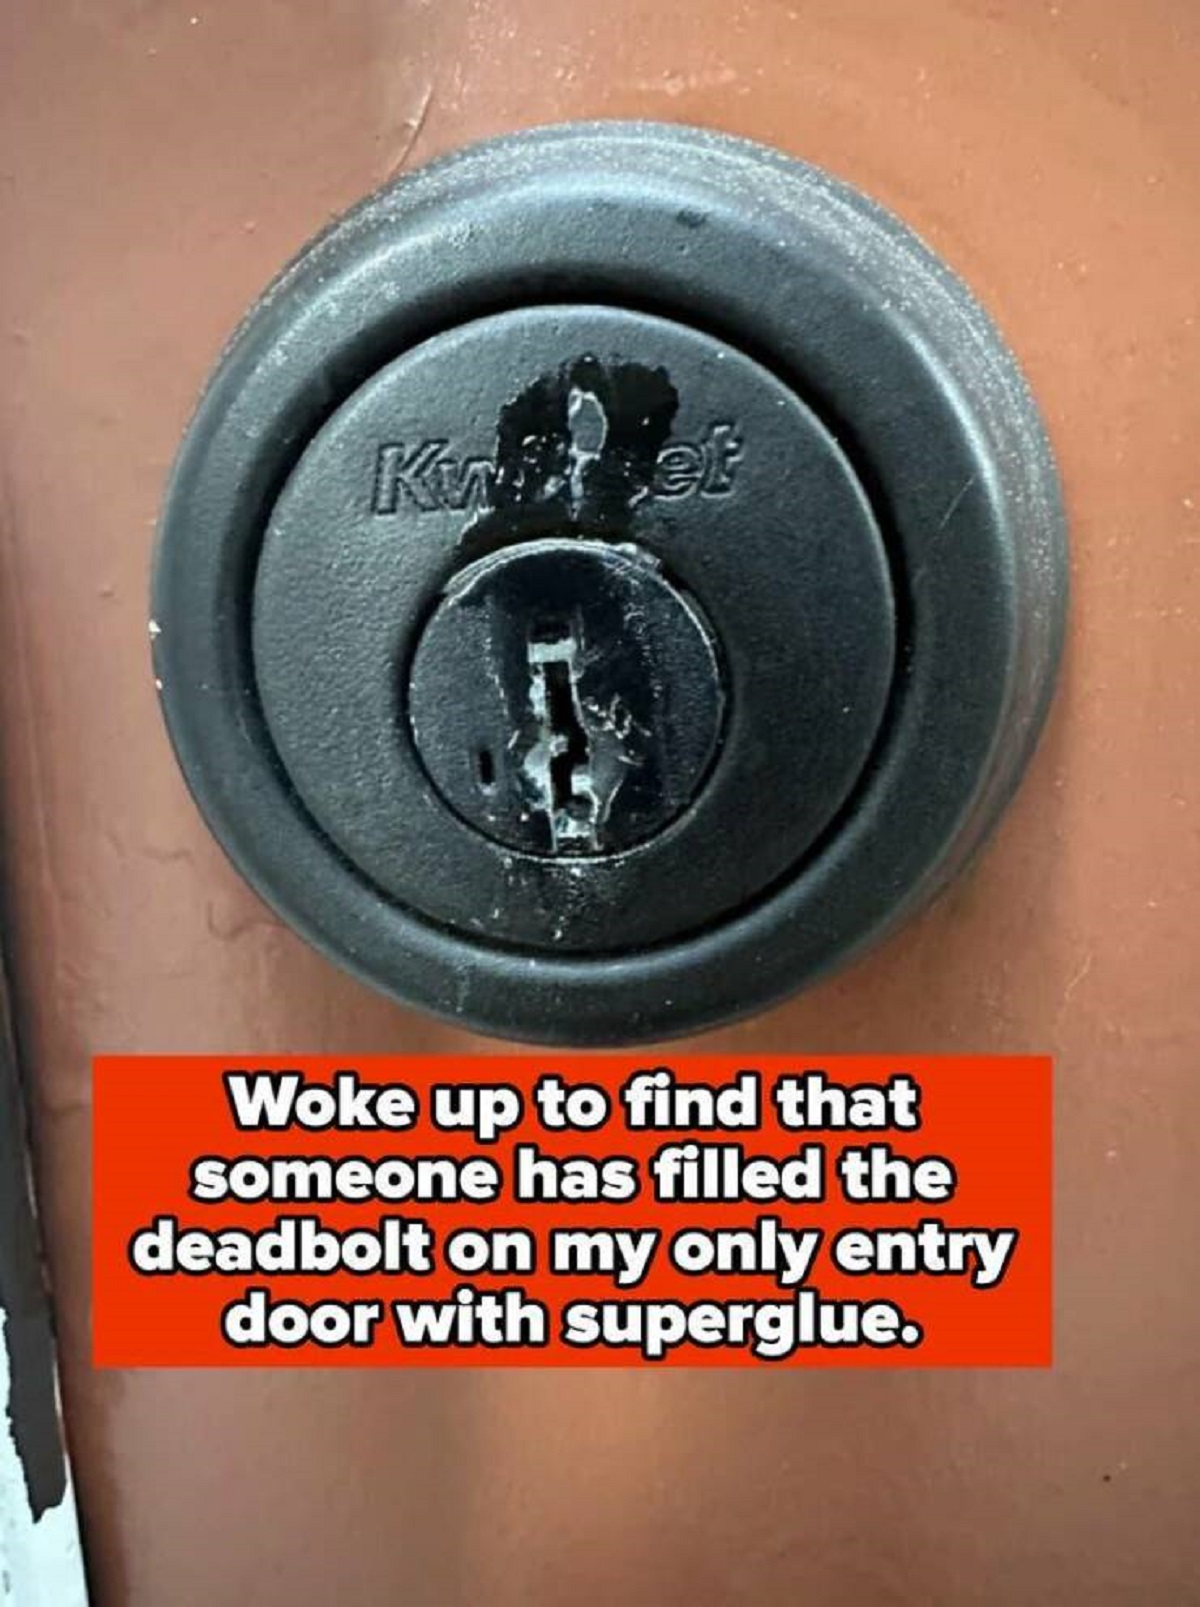 Door - Kuit et Woke up to find that someone has filled the deadbolt on my only entry door with superglue.